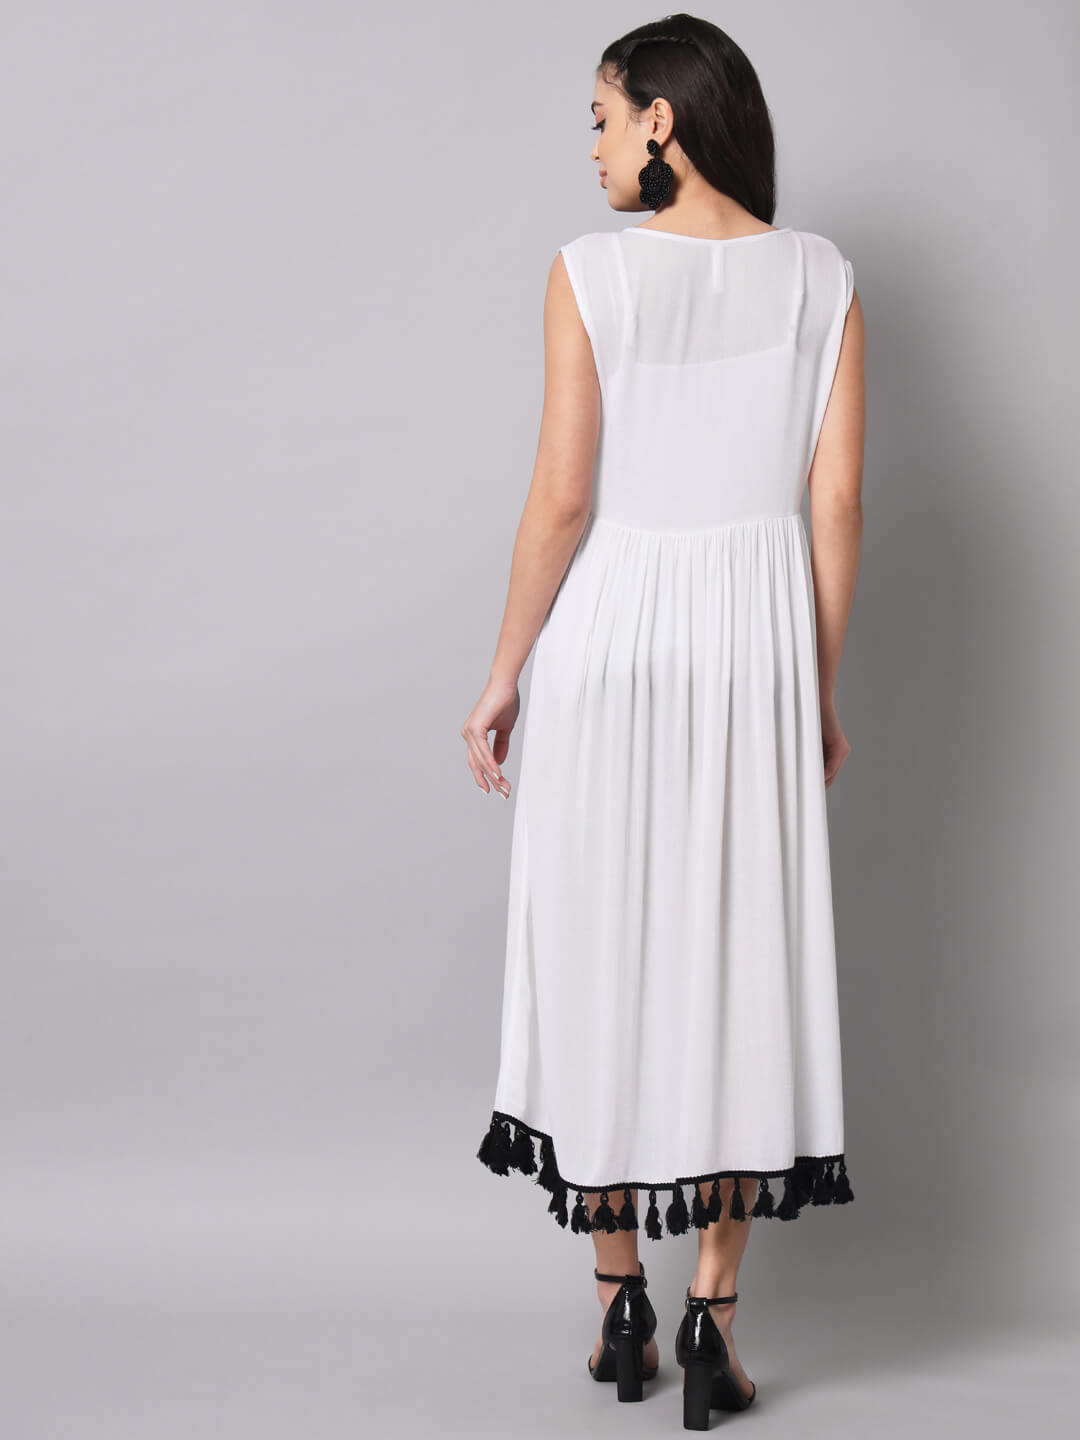 White Maxi Dress With Lace